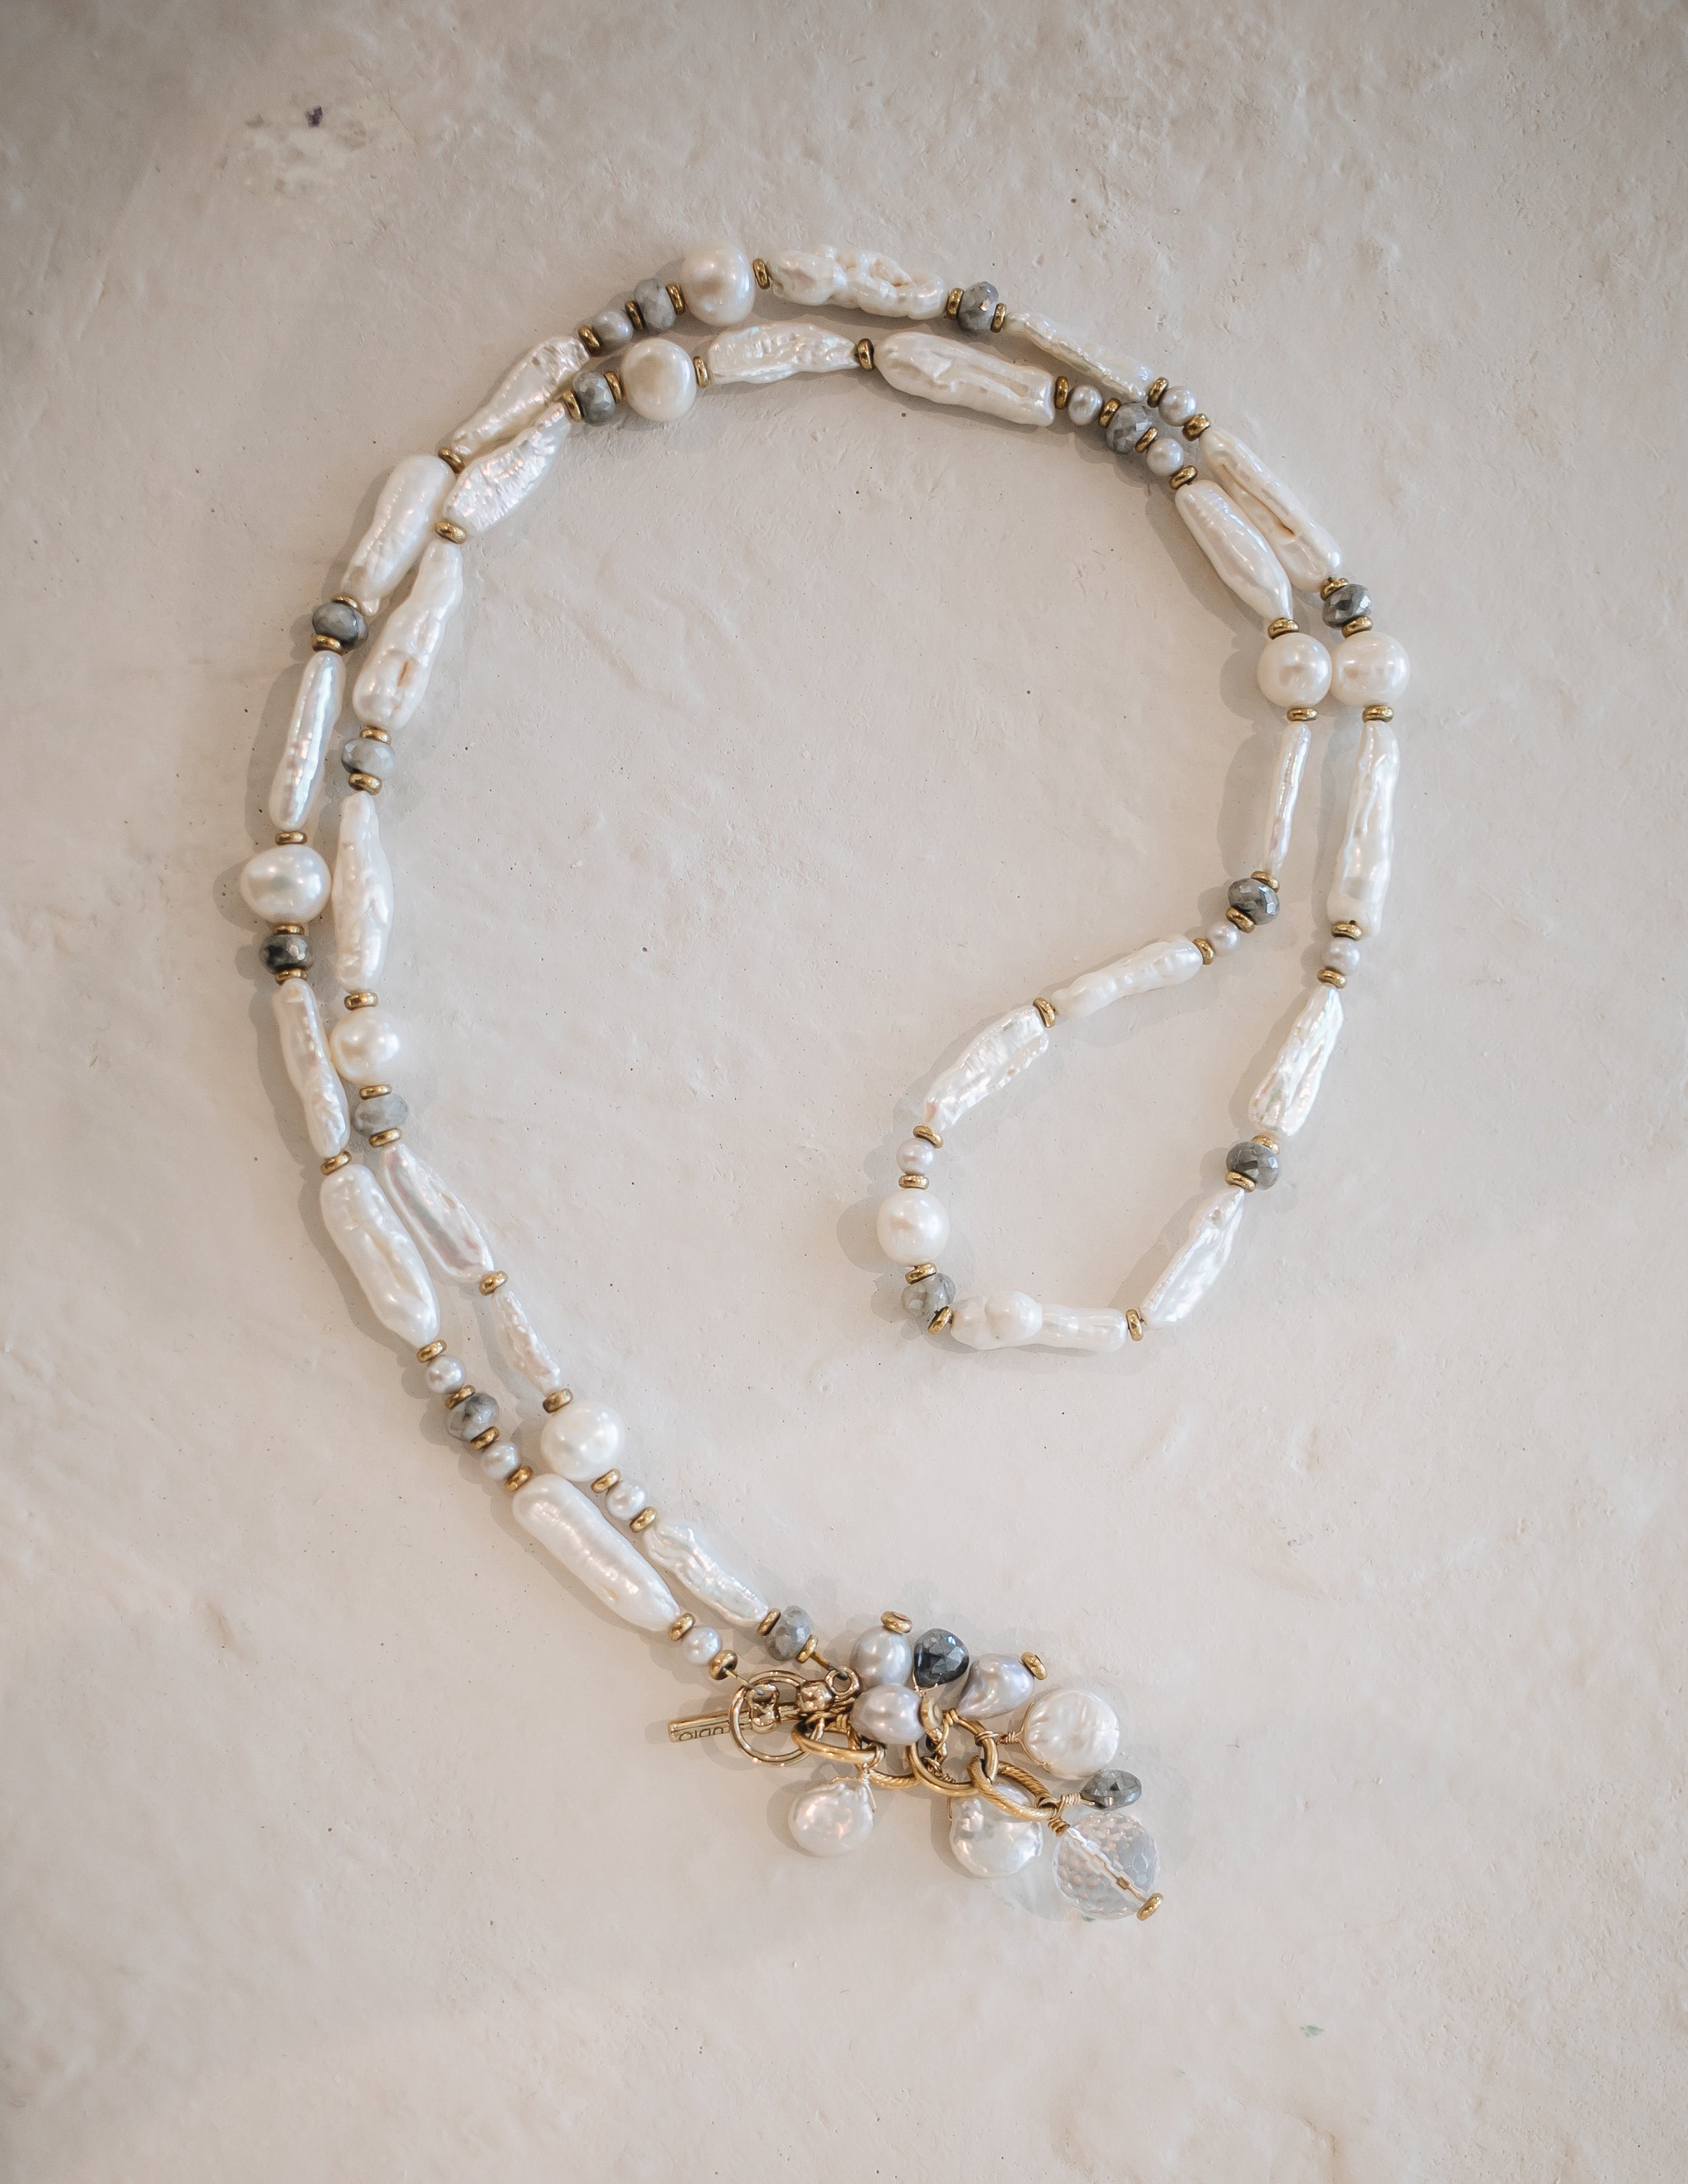 White Biwa Pearl & Silverite Necklace With Pearl Cluster Drop